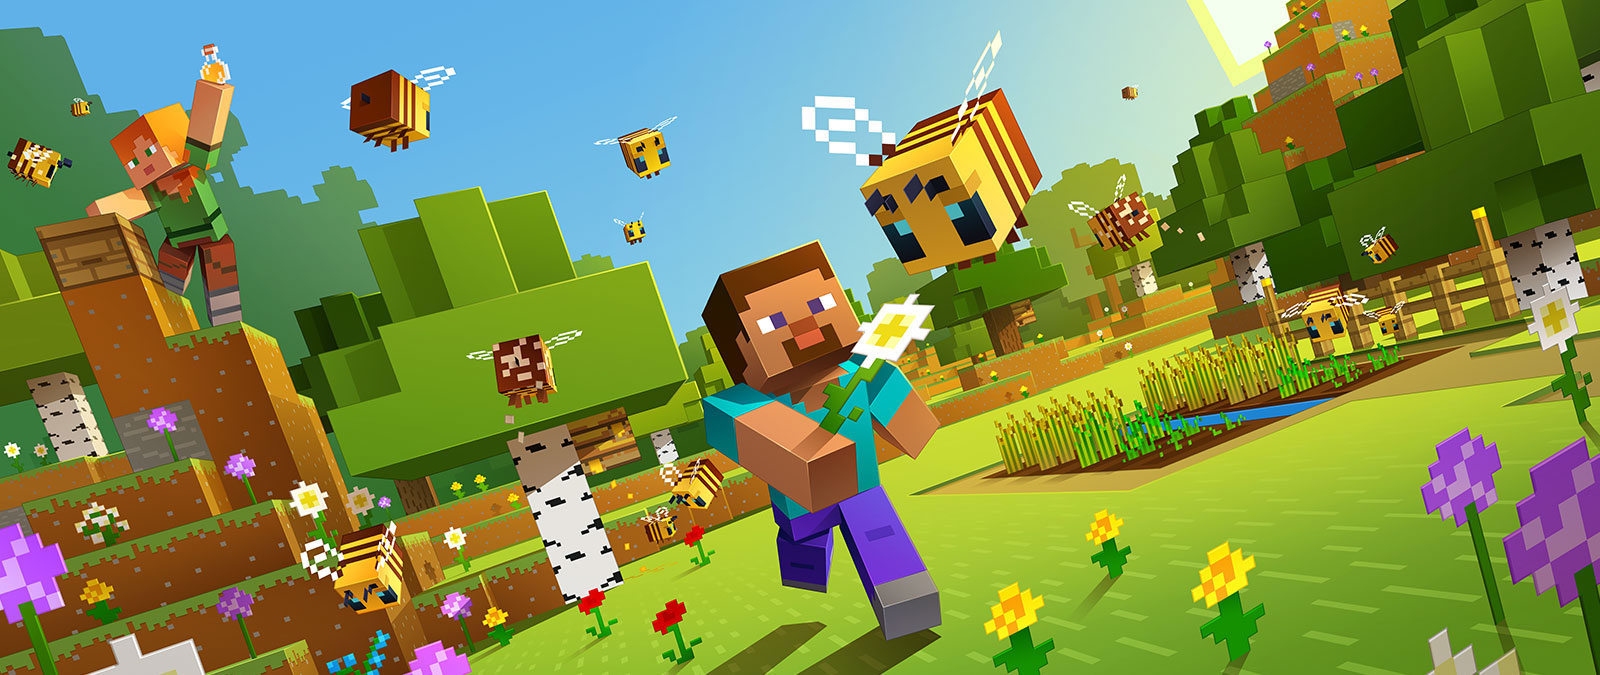 How to add friends in Minecraft for Xbox, PlayStation, PC - Dot Esports